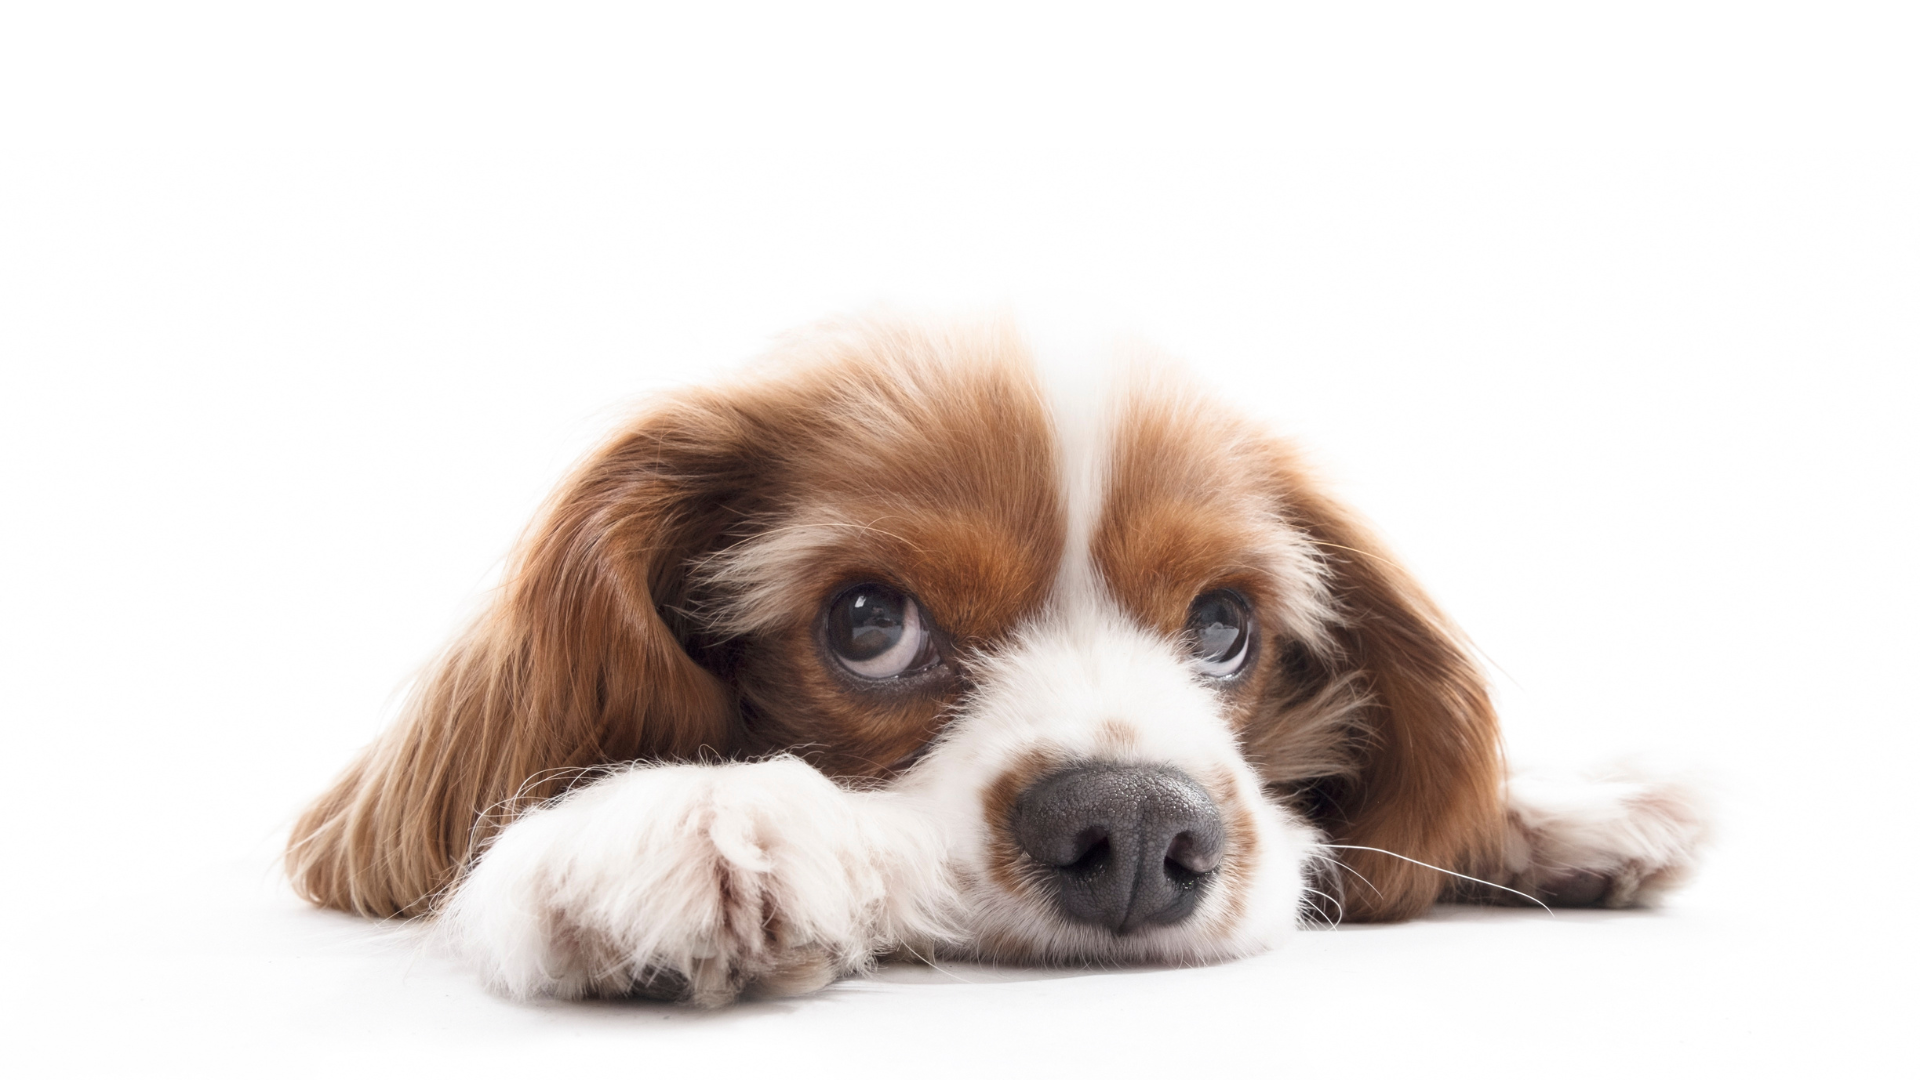 Natural Remedies for Dog Anxiety